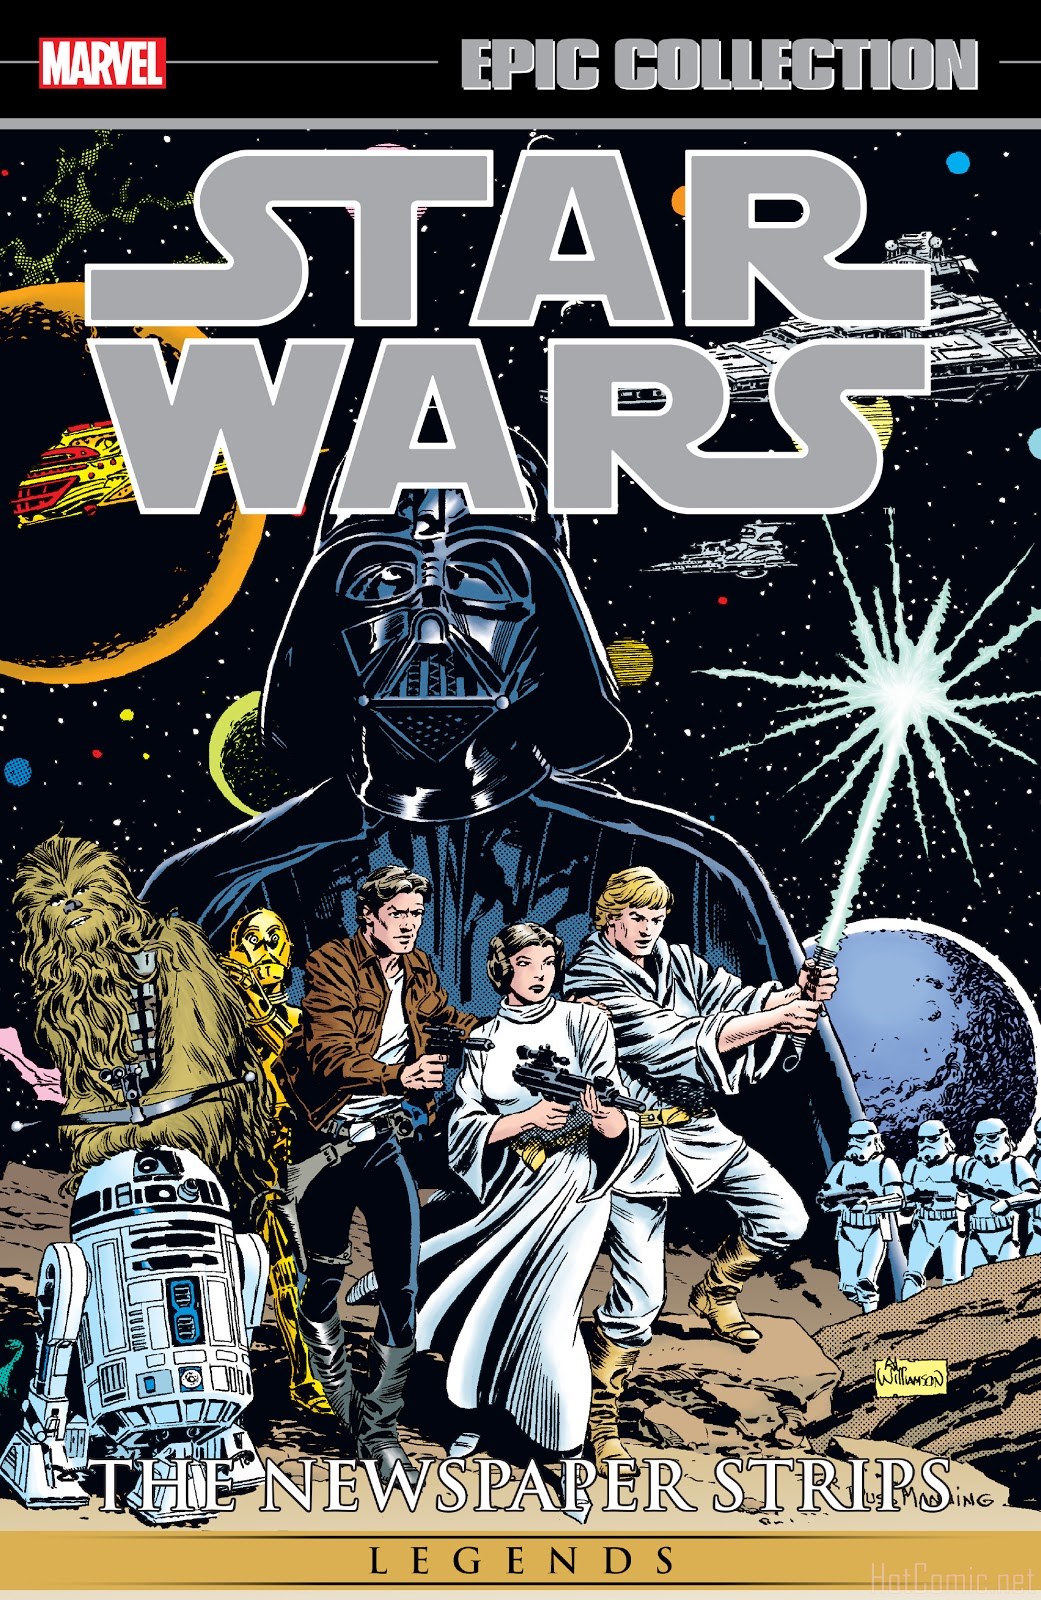 Star Wars Legends: The Newspaper Strips - Epic Collection comic